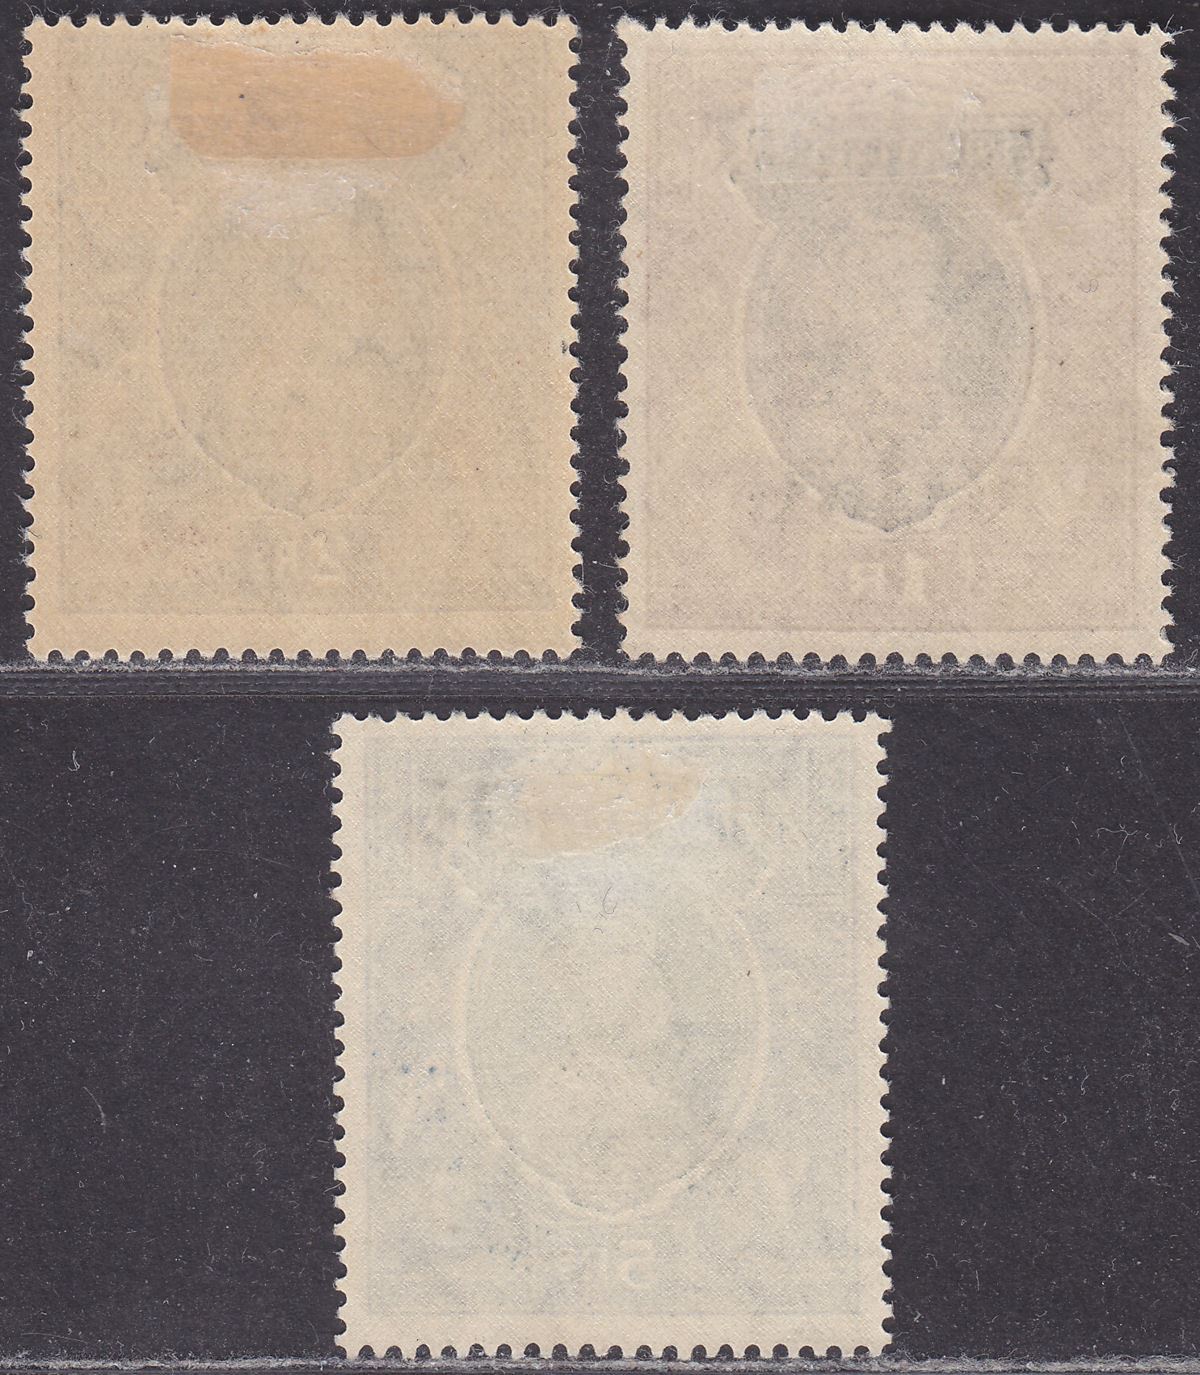 Indian States Gwalior 1942 KGVI Official Opt Set to 5r Mint SG O91-O93 cat £60